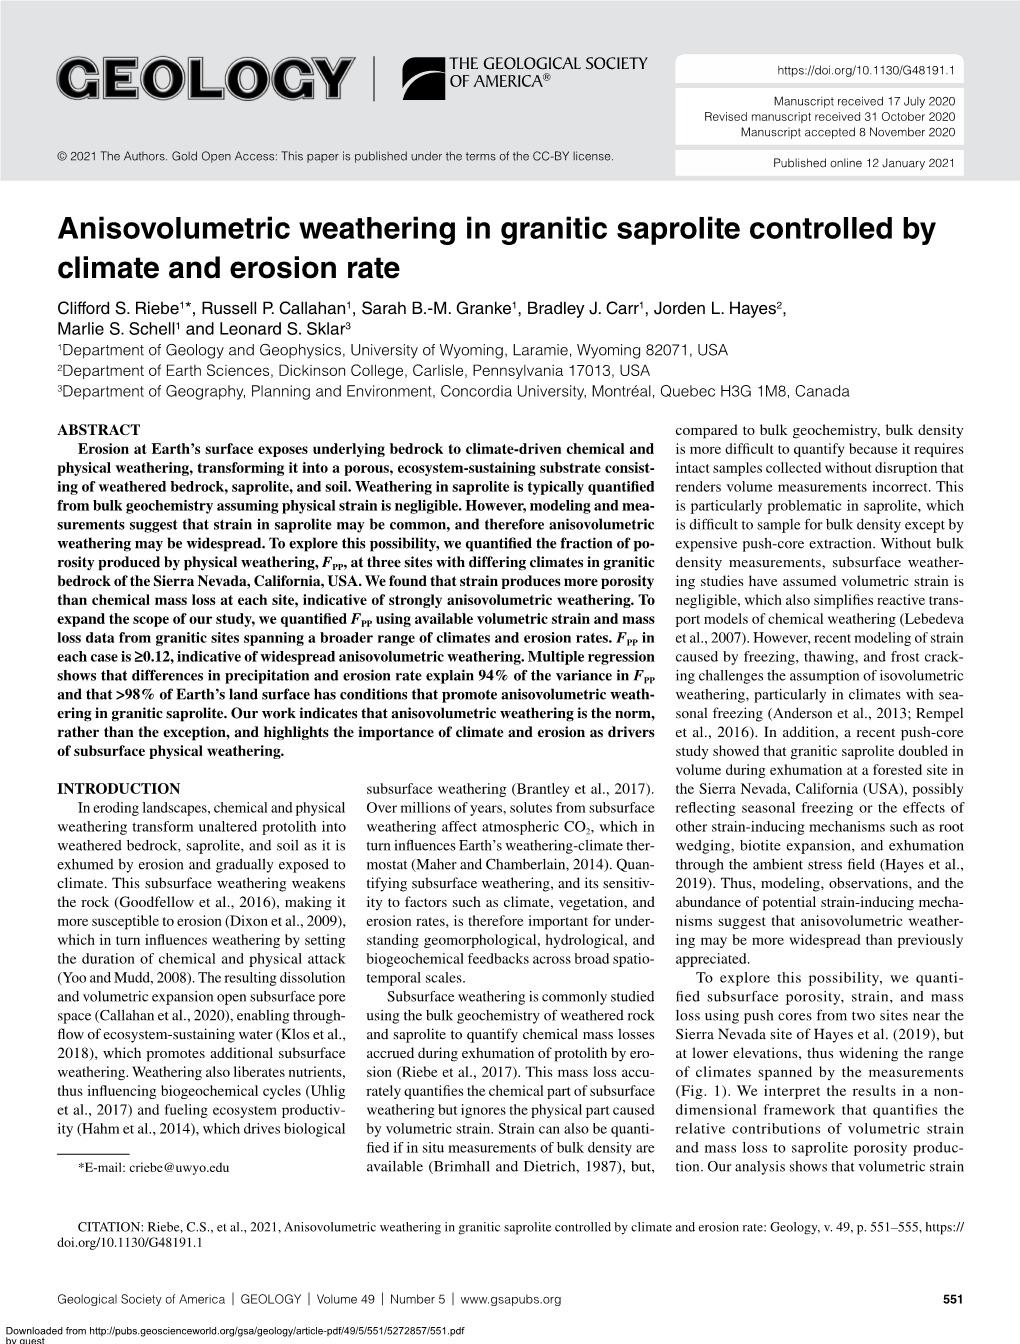 Anisovolumetric Weathering in Granitic Saprolite Controlled by Climate and Erosion Rate Clifford S